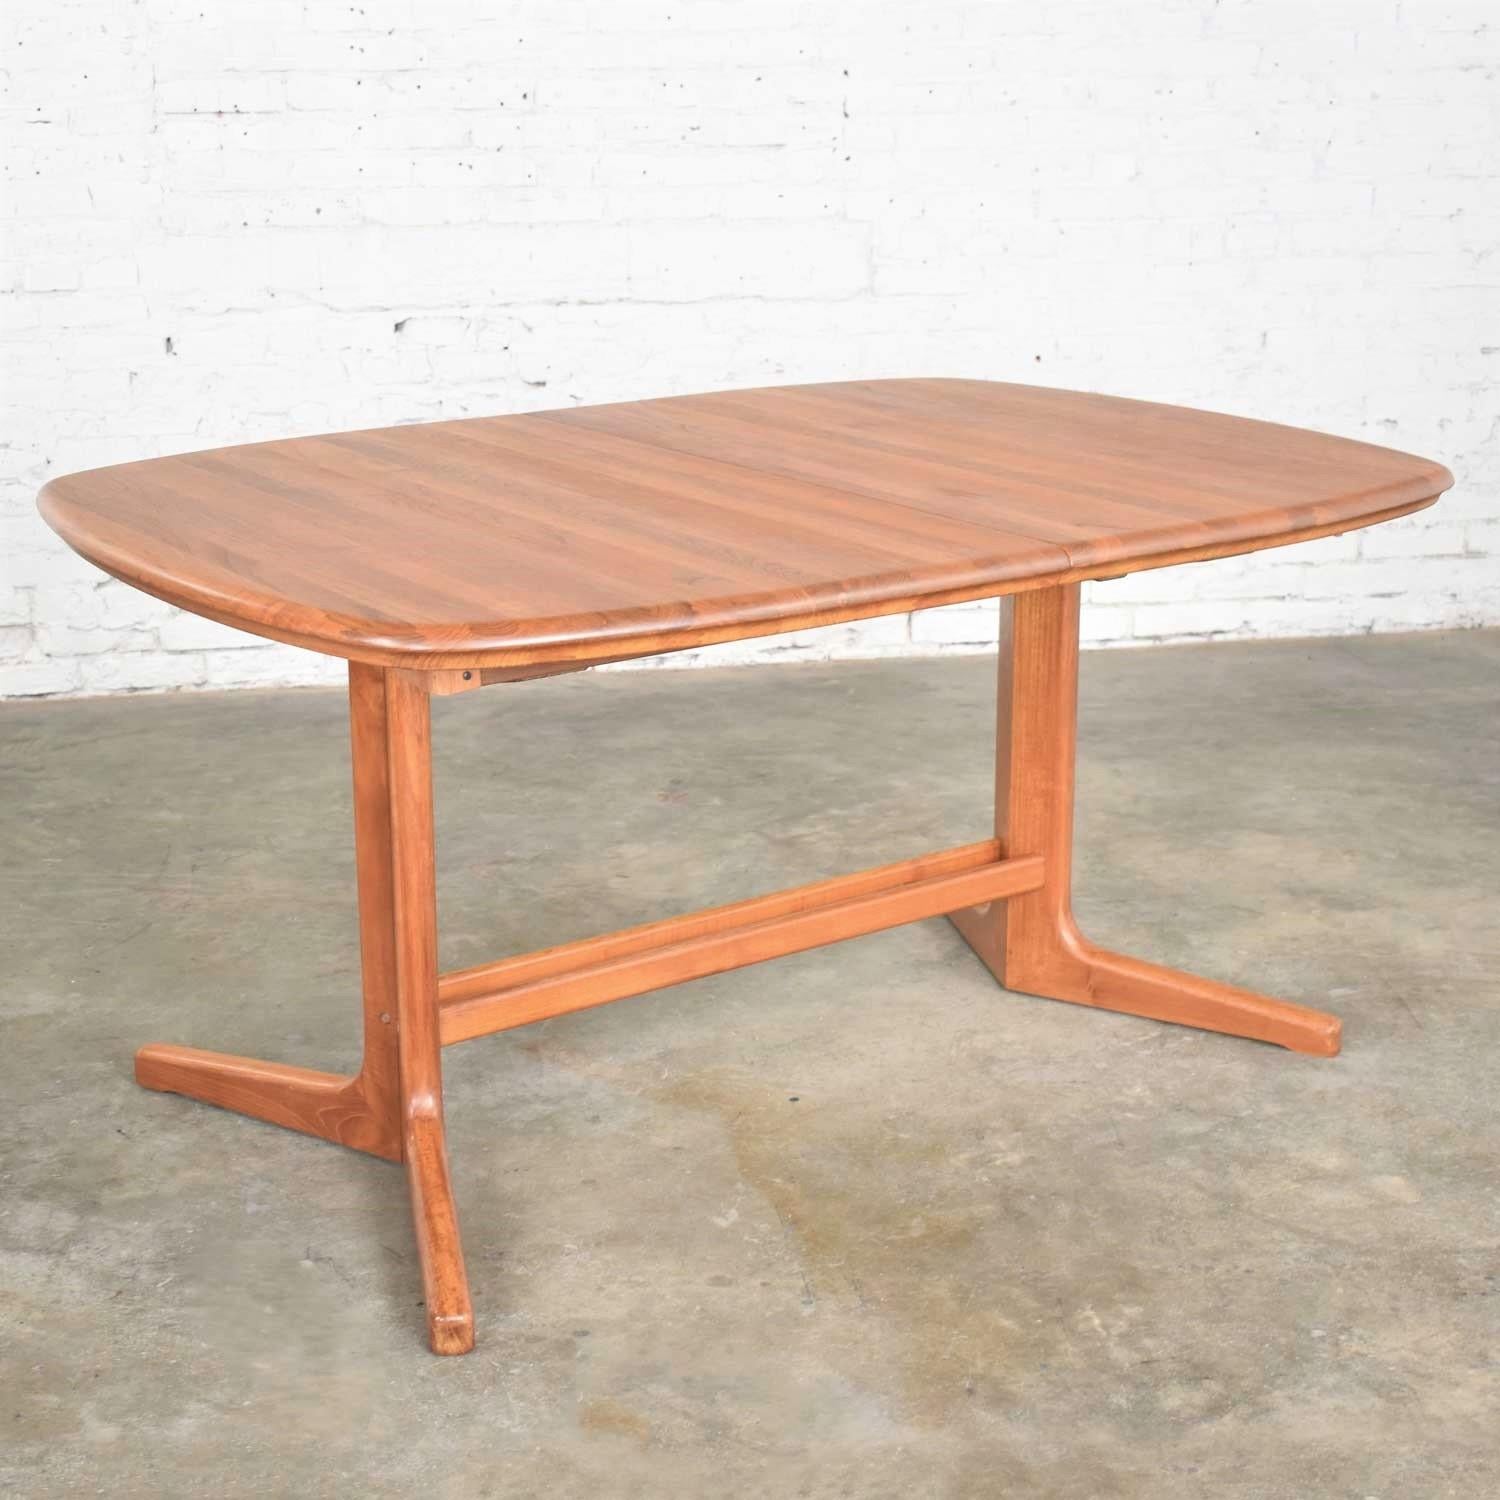 20th Century Scandinavian Modern Teak Oval Expanding Dining Table Attributed to Dyrlund